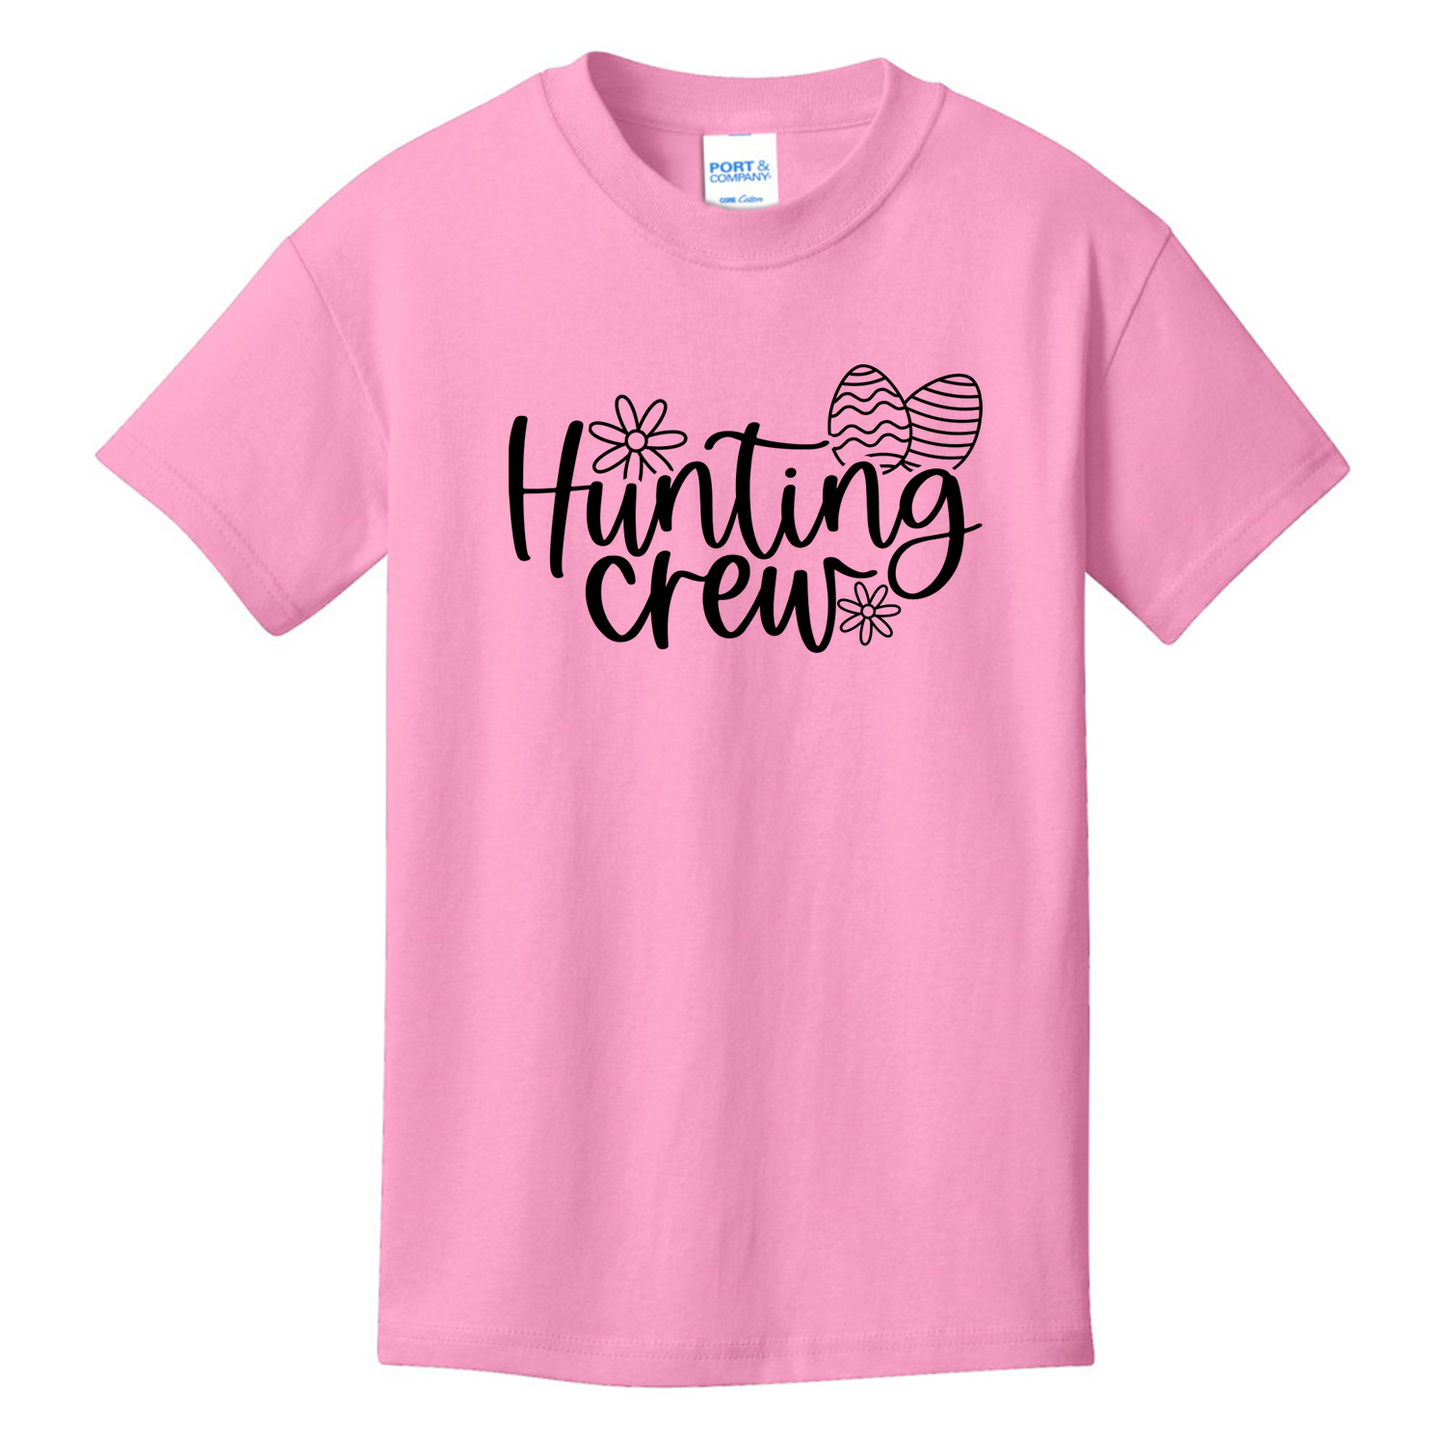 Hunting Crew - Youth Unisex Easter Egg T-shirt